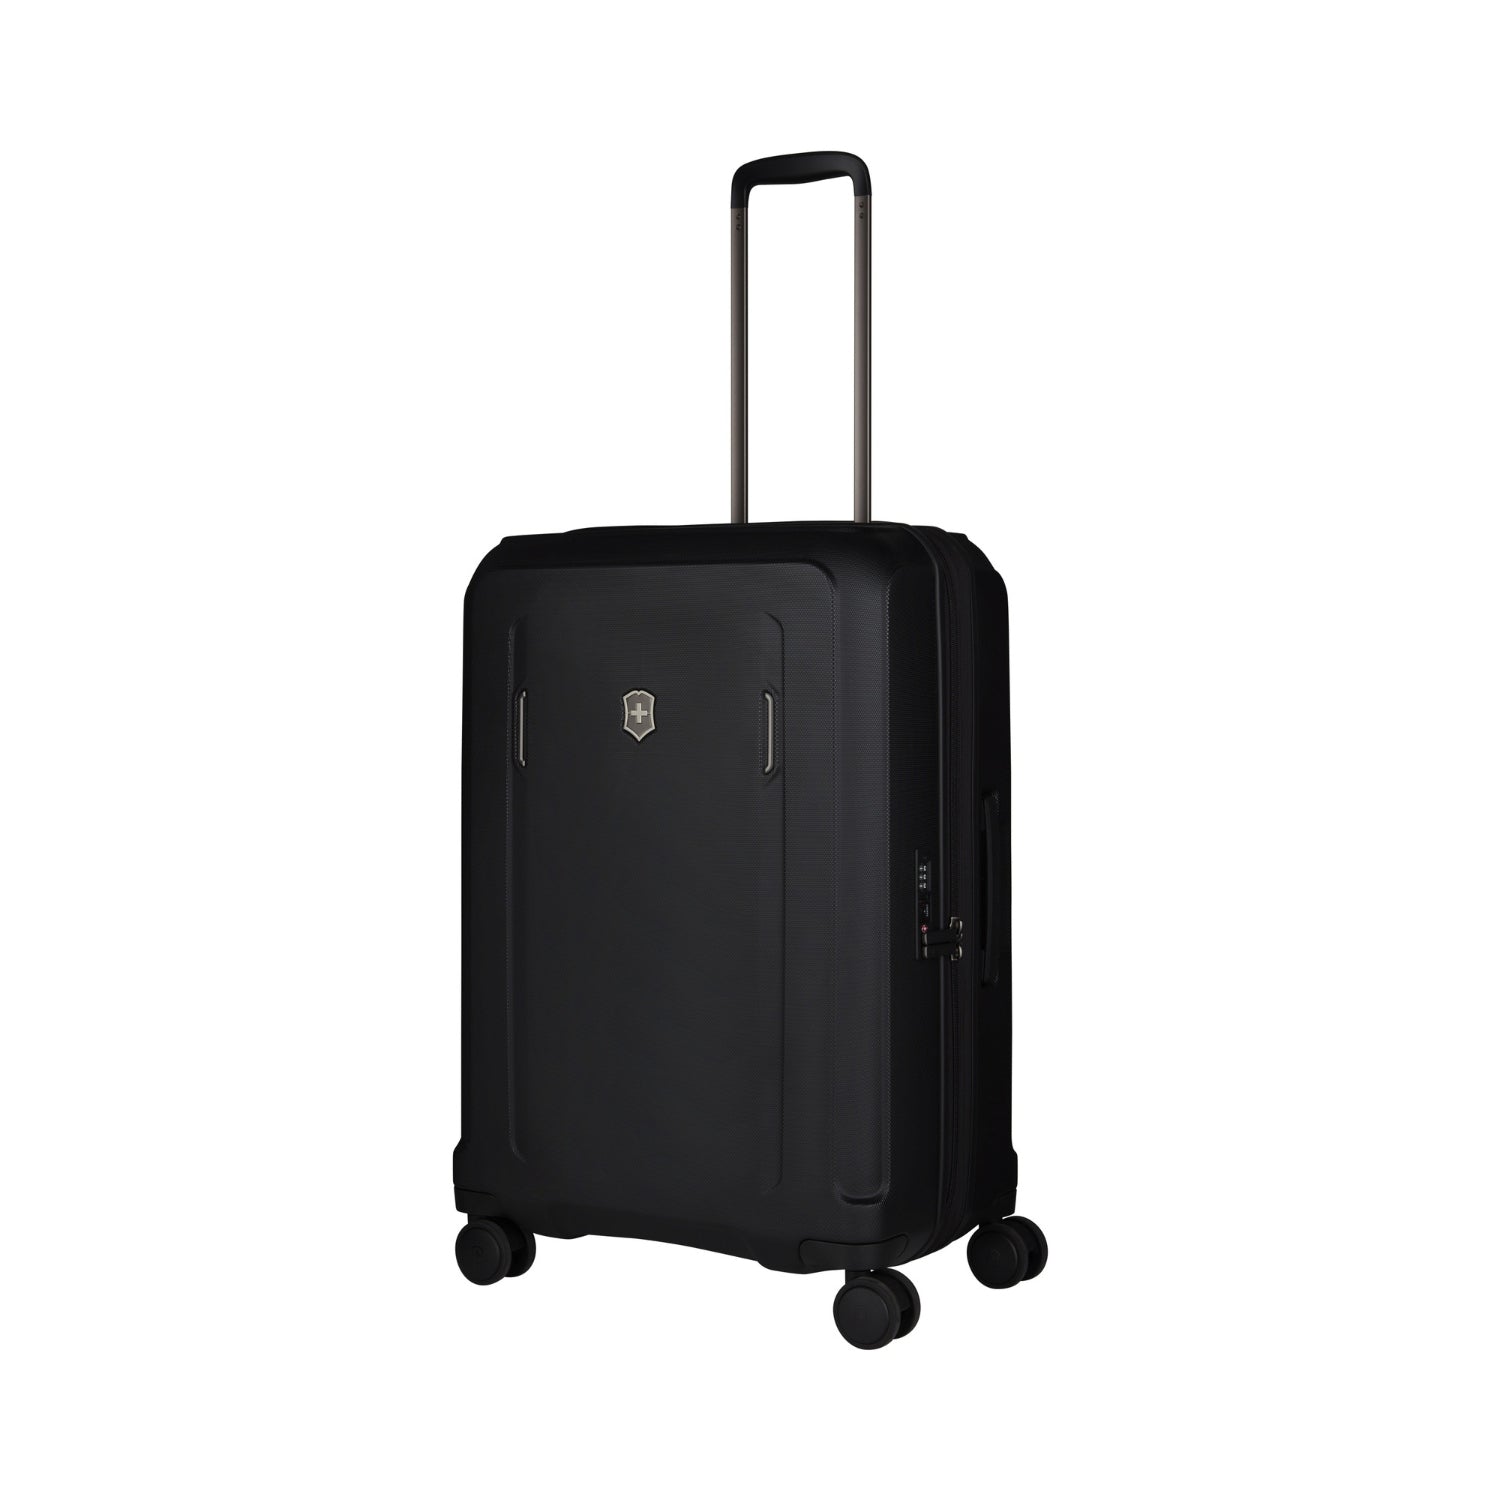 Victorinox Werks Traveler 6.0 69cm Hardcase Expandable 4 Double Wheel Lightweight Check-In Luggage Trolley Black - 609970